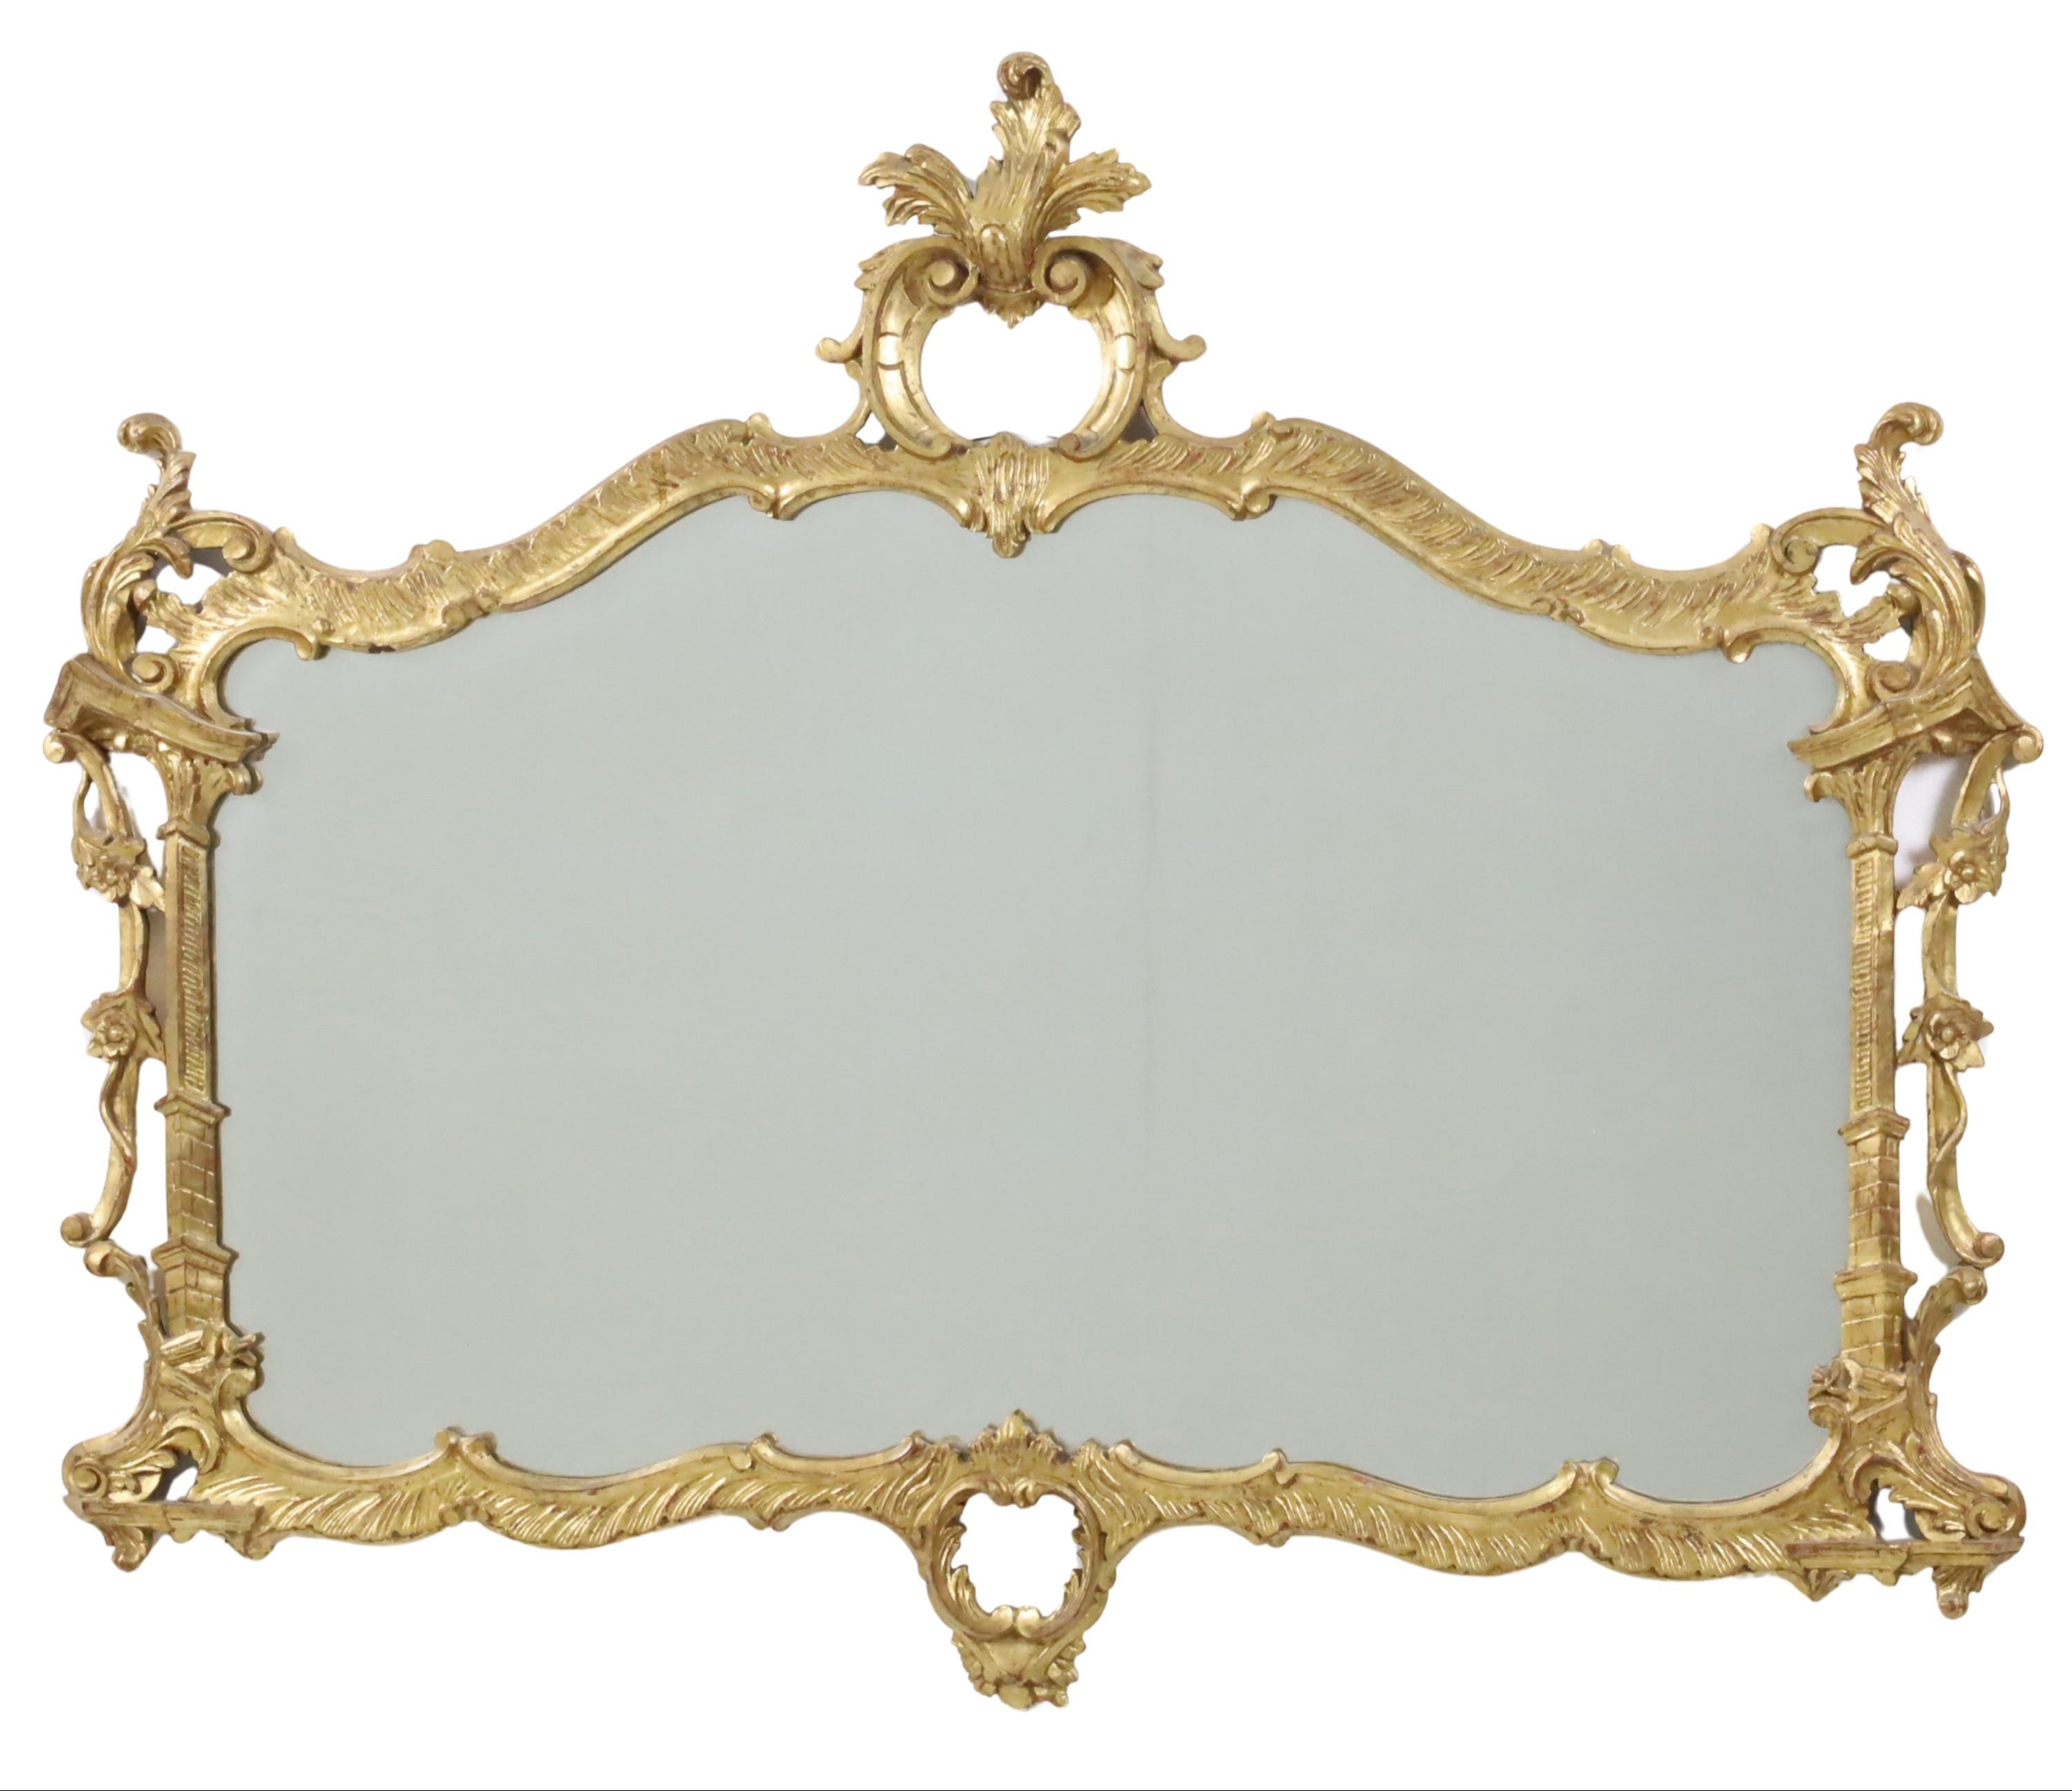 CHINESE CHIPPENDALE STYLE MIRROR